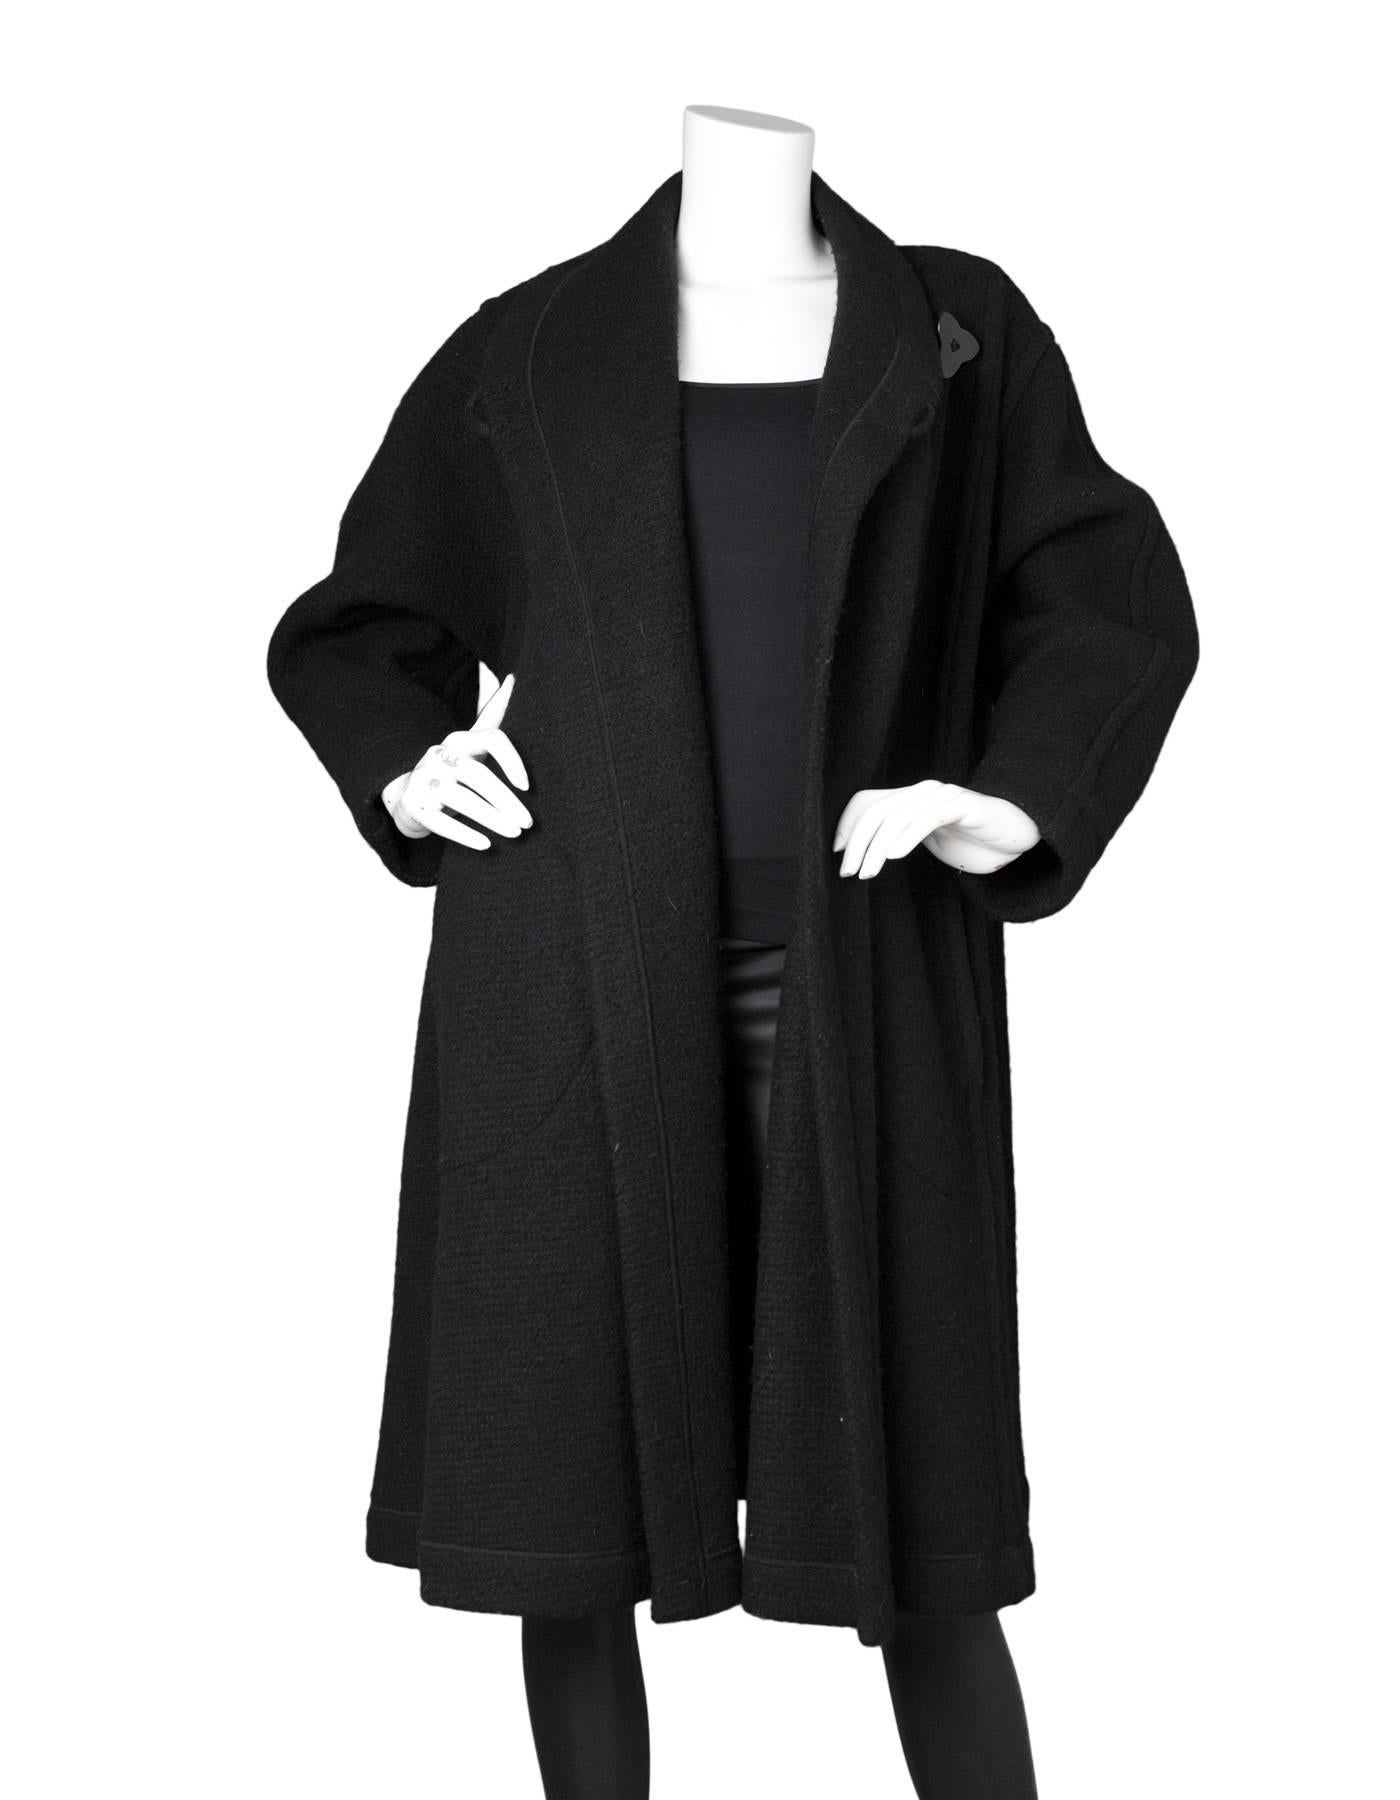 Missoni Vintage Black Wool Swing Coat 
Features wrap-style closure

Made In: Italy
Color: Black
Composition: Not given- believed to be a wool blend
Lining: None
Closure/Opening: Two wrap-style collar line buttons
Exterior Pockets: Two hip